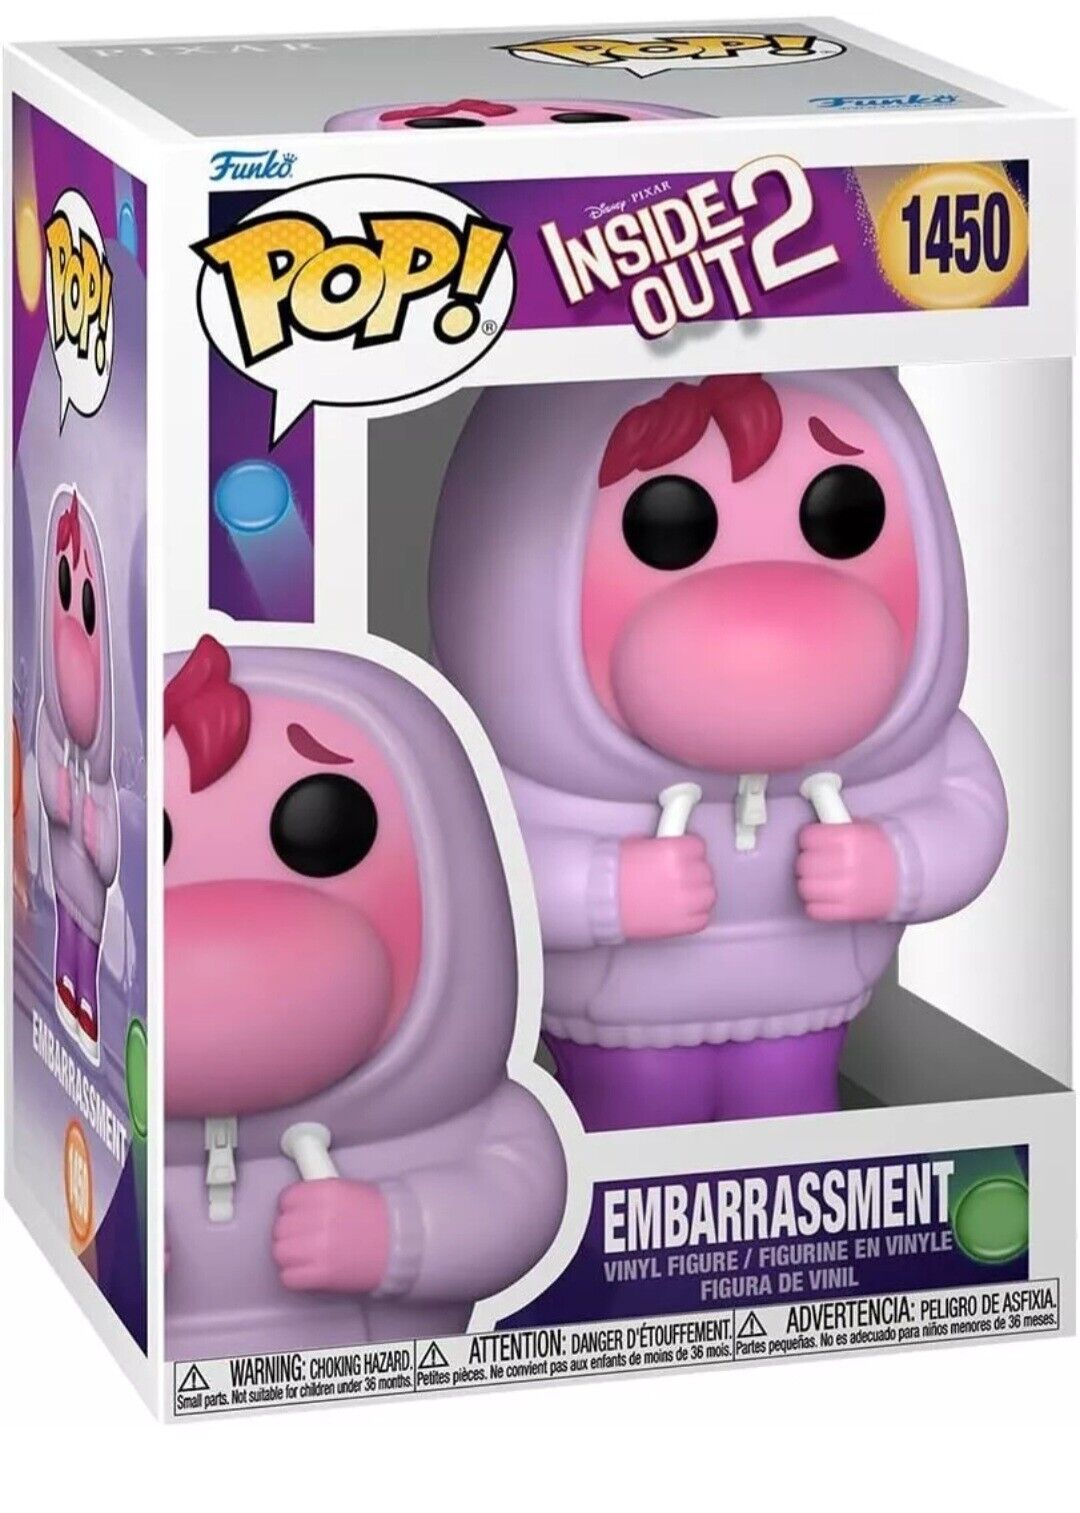 Funko Pop Disney Inside Out 2 - Embarrassment Figurine  W/Protection Case